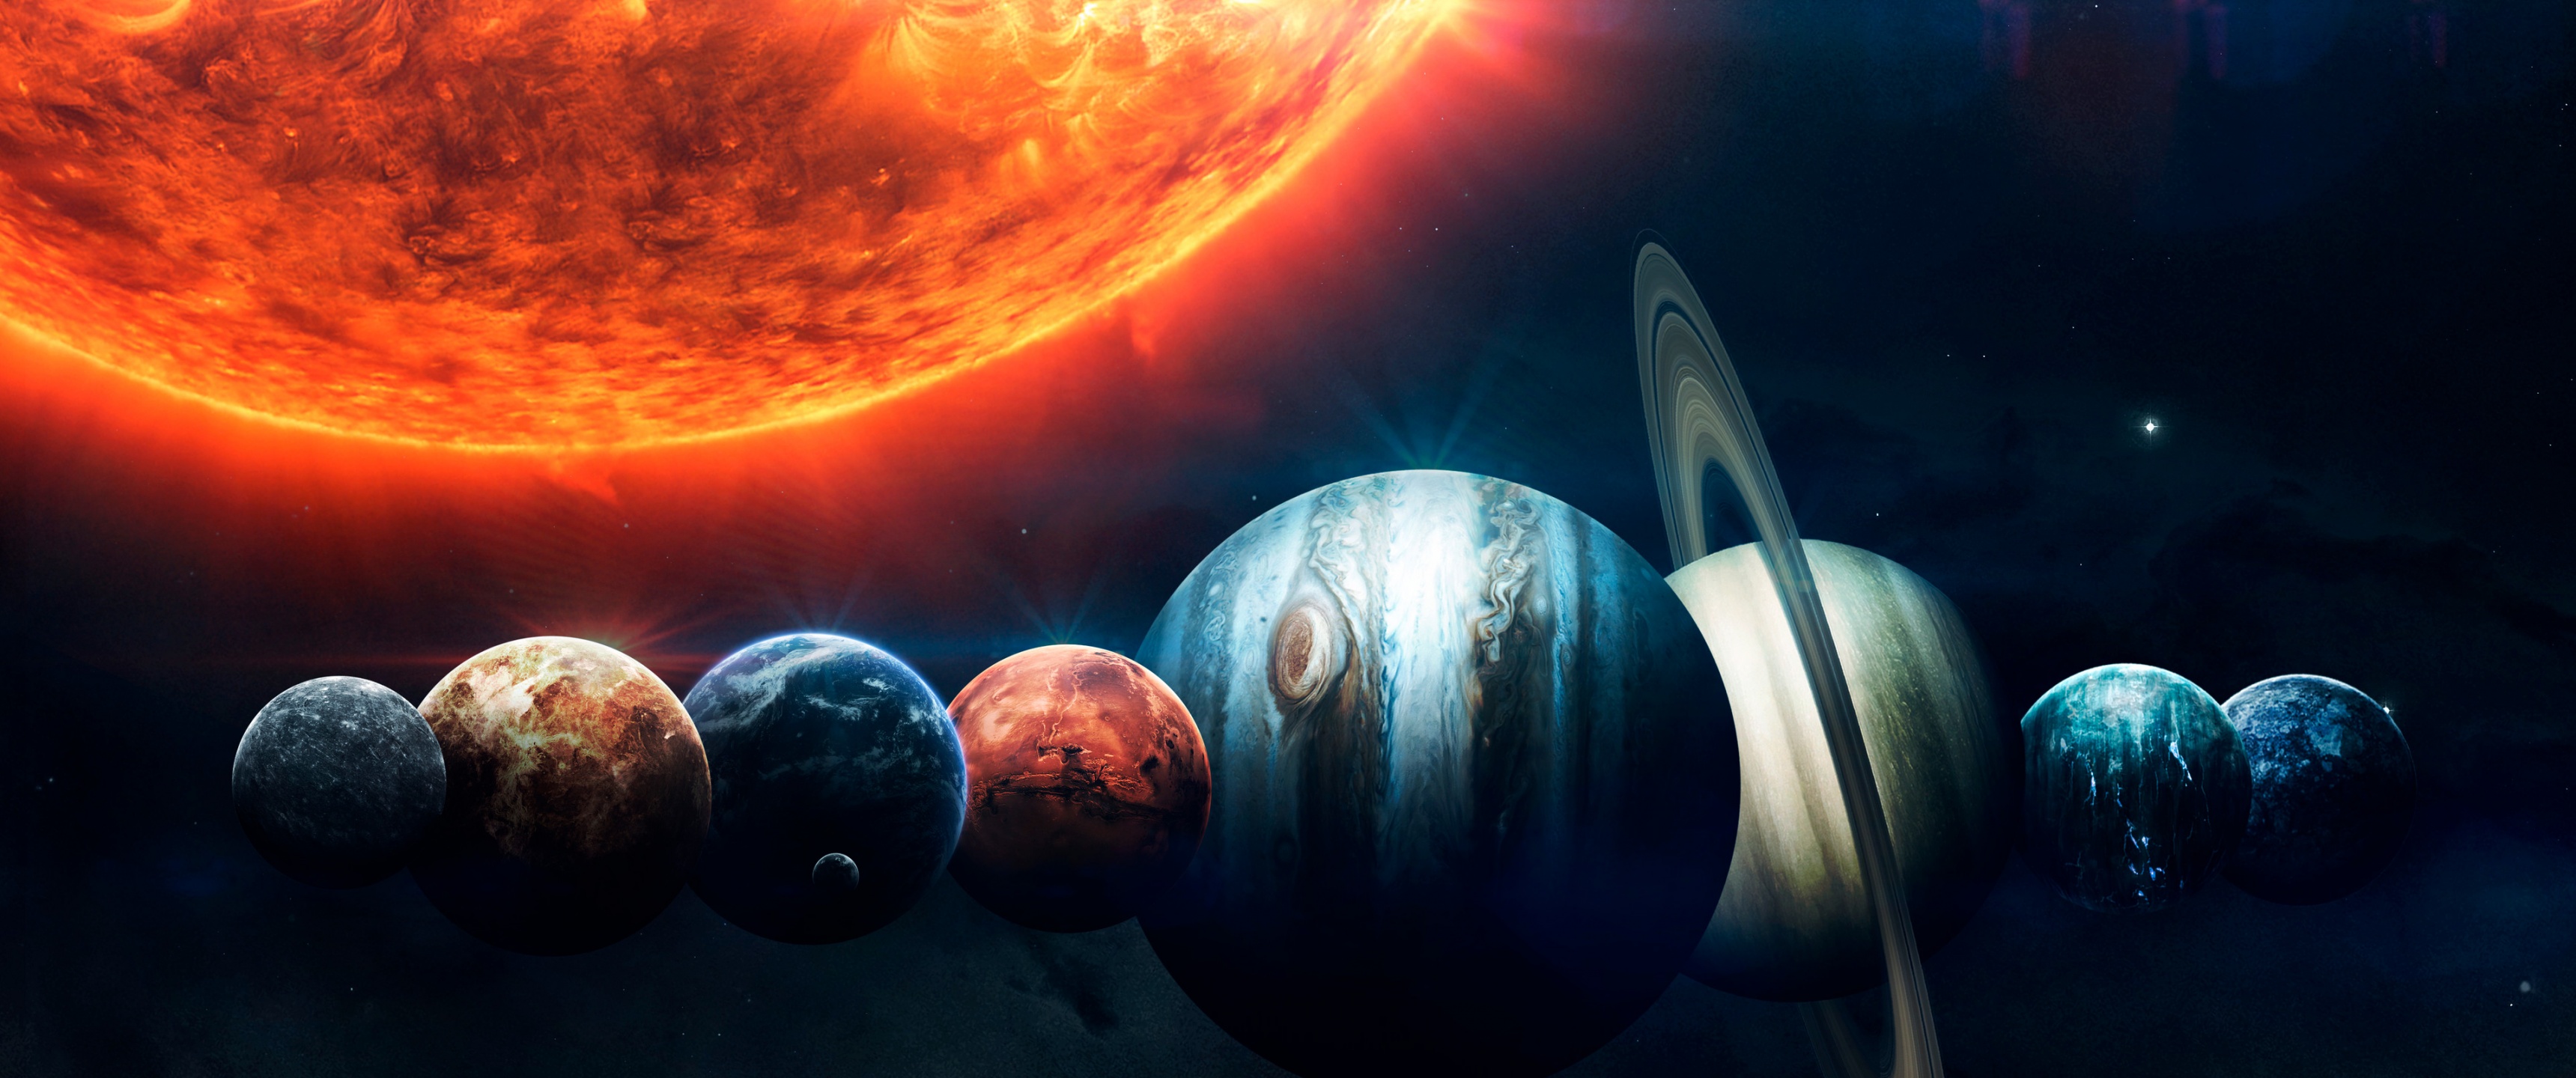 Solar System Background Images HD Pictures and Wallpaper For Free Download   Pngtree